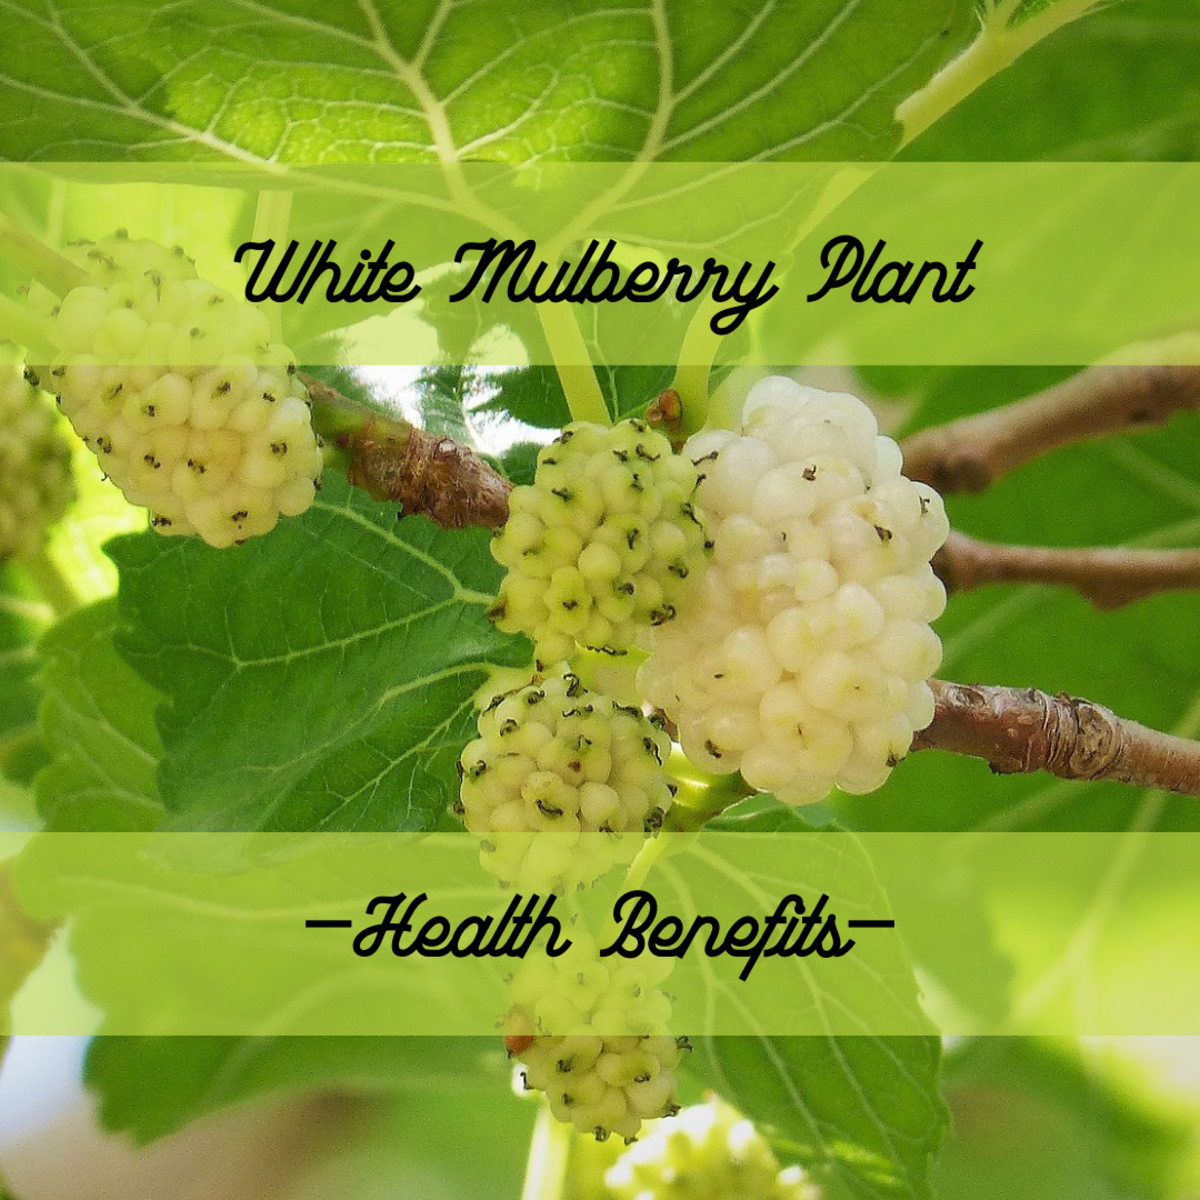 The Wide-Ranging Benefits of the White Mulberry Plant